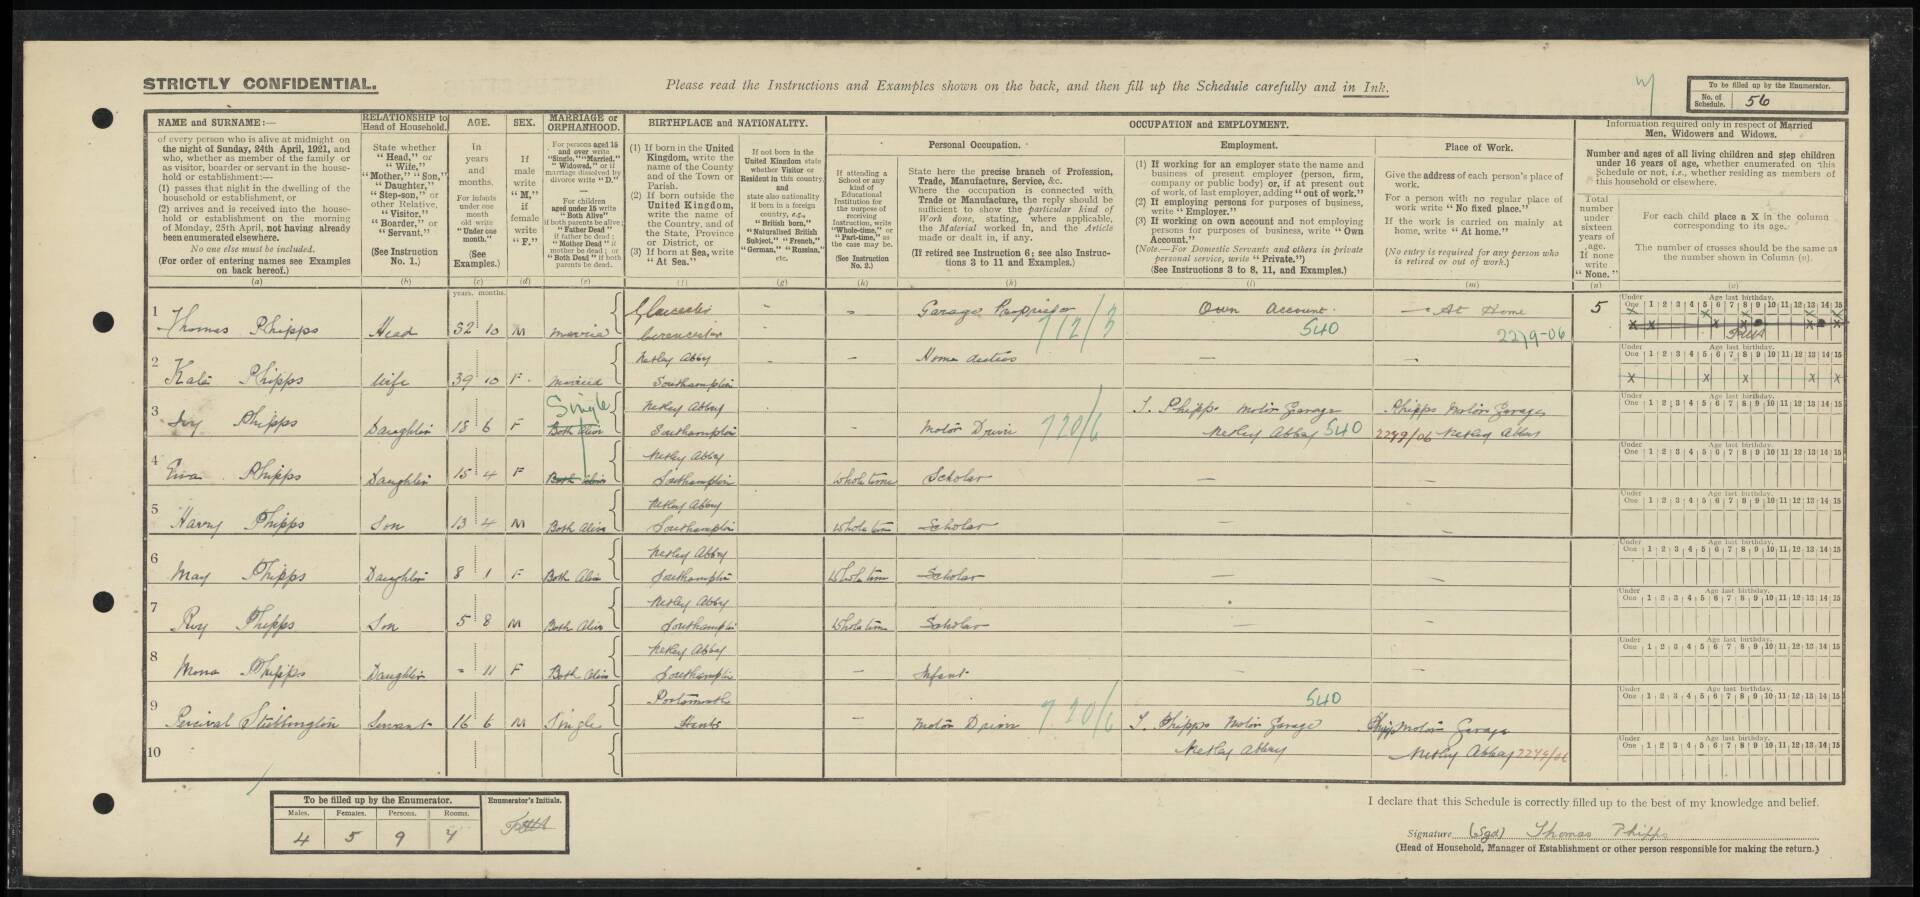 1921 Census for Phipps Family